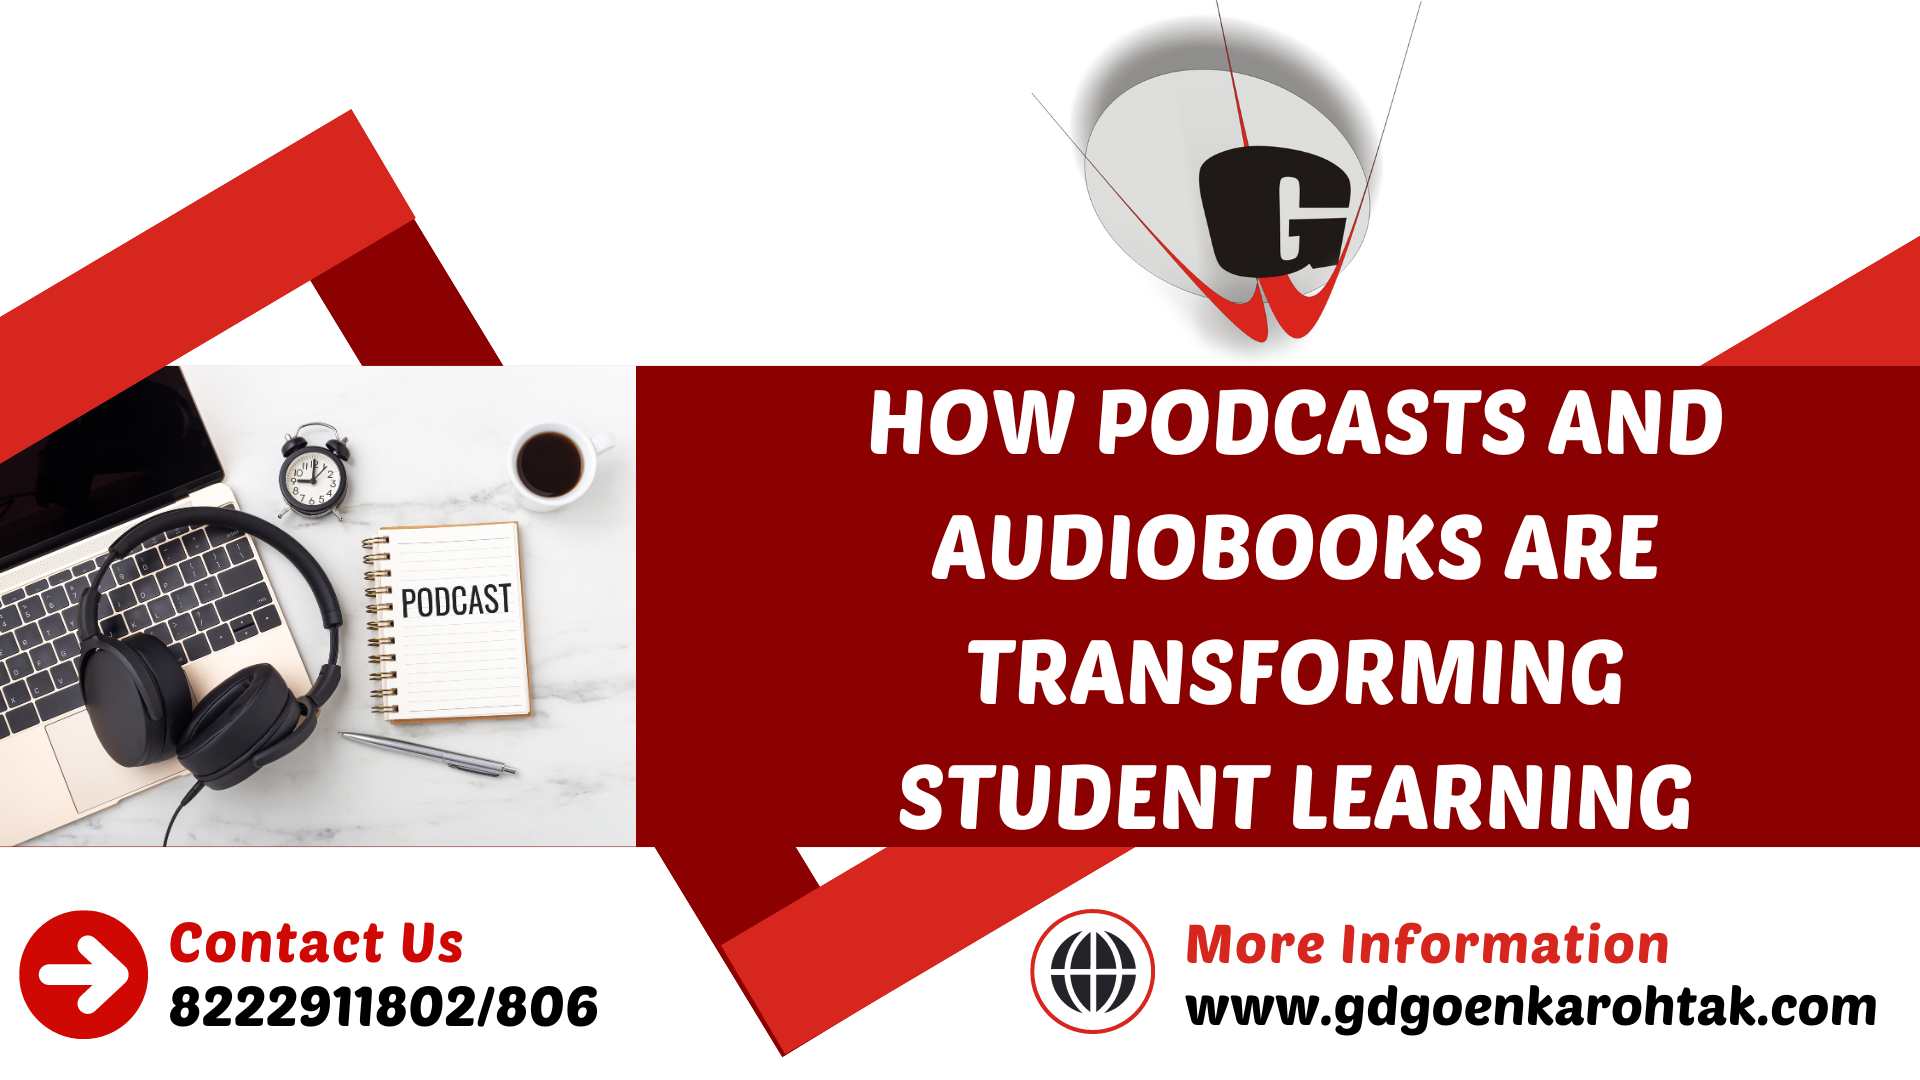 HOW PODCASTS AND AUDIOBOOKS ARE TRANSFORMING STUDENT LEARNING